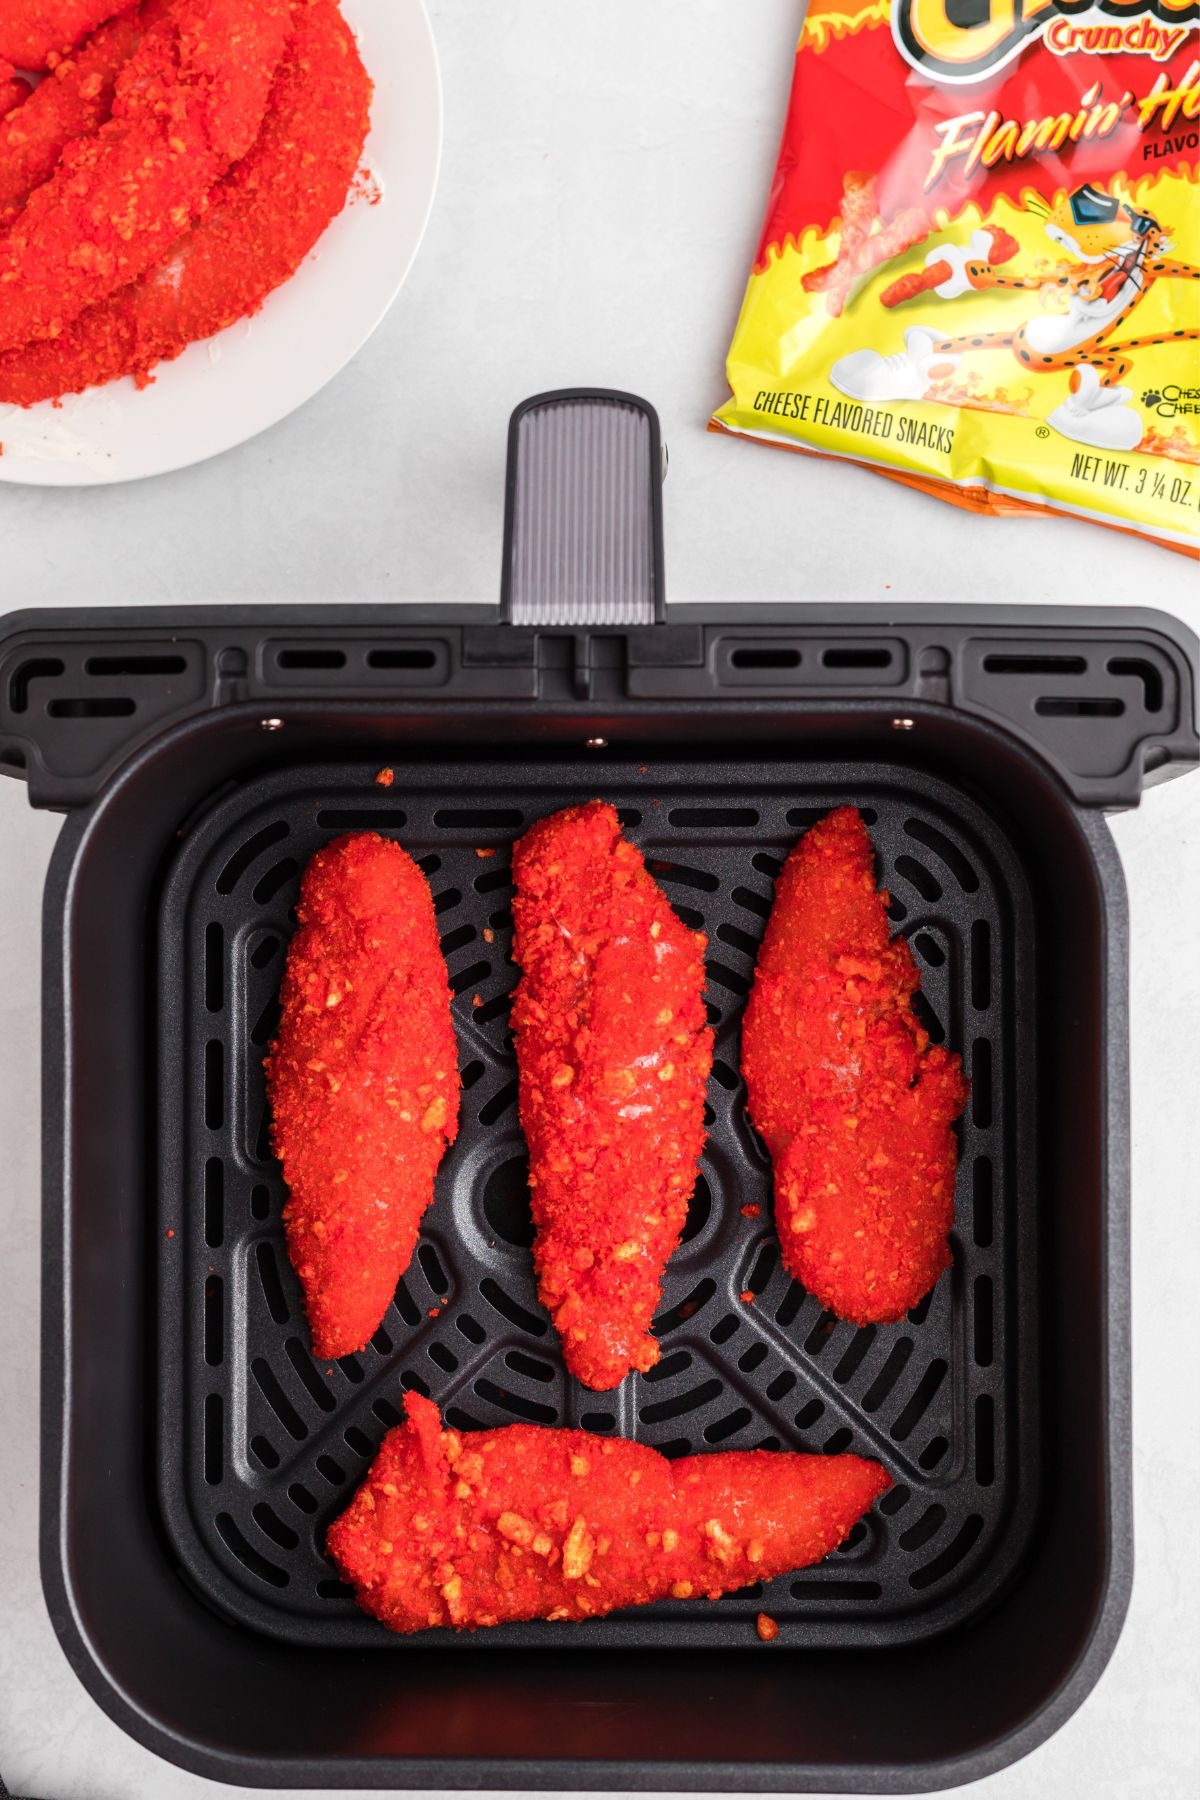 Coated cheeto chicken in the air fryer basket before being cooked